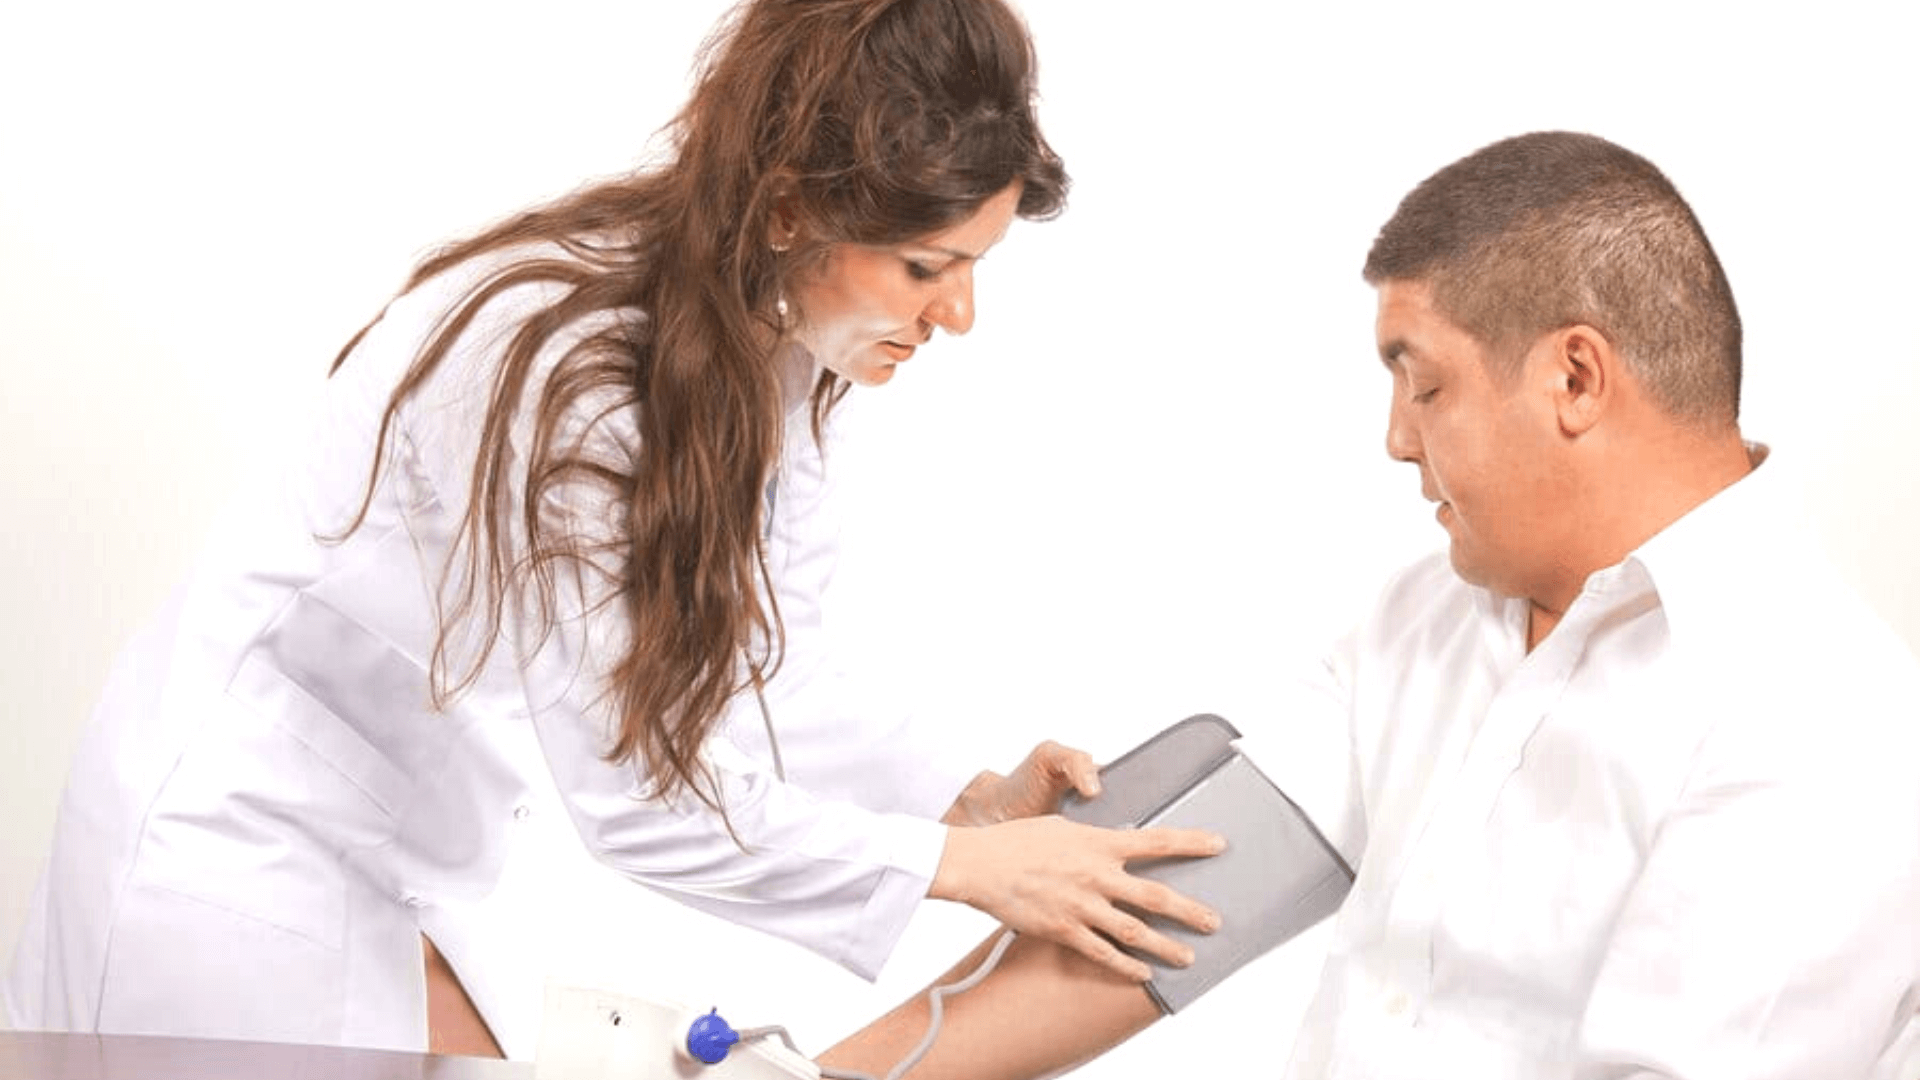 Woman in a white coat applying a blood pressure cuff to a middle aged man.